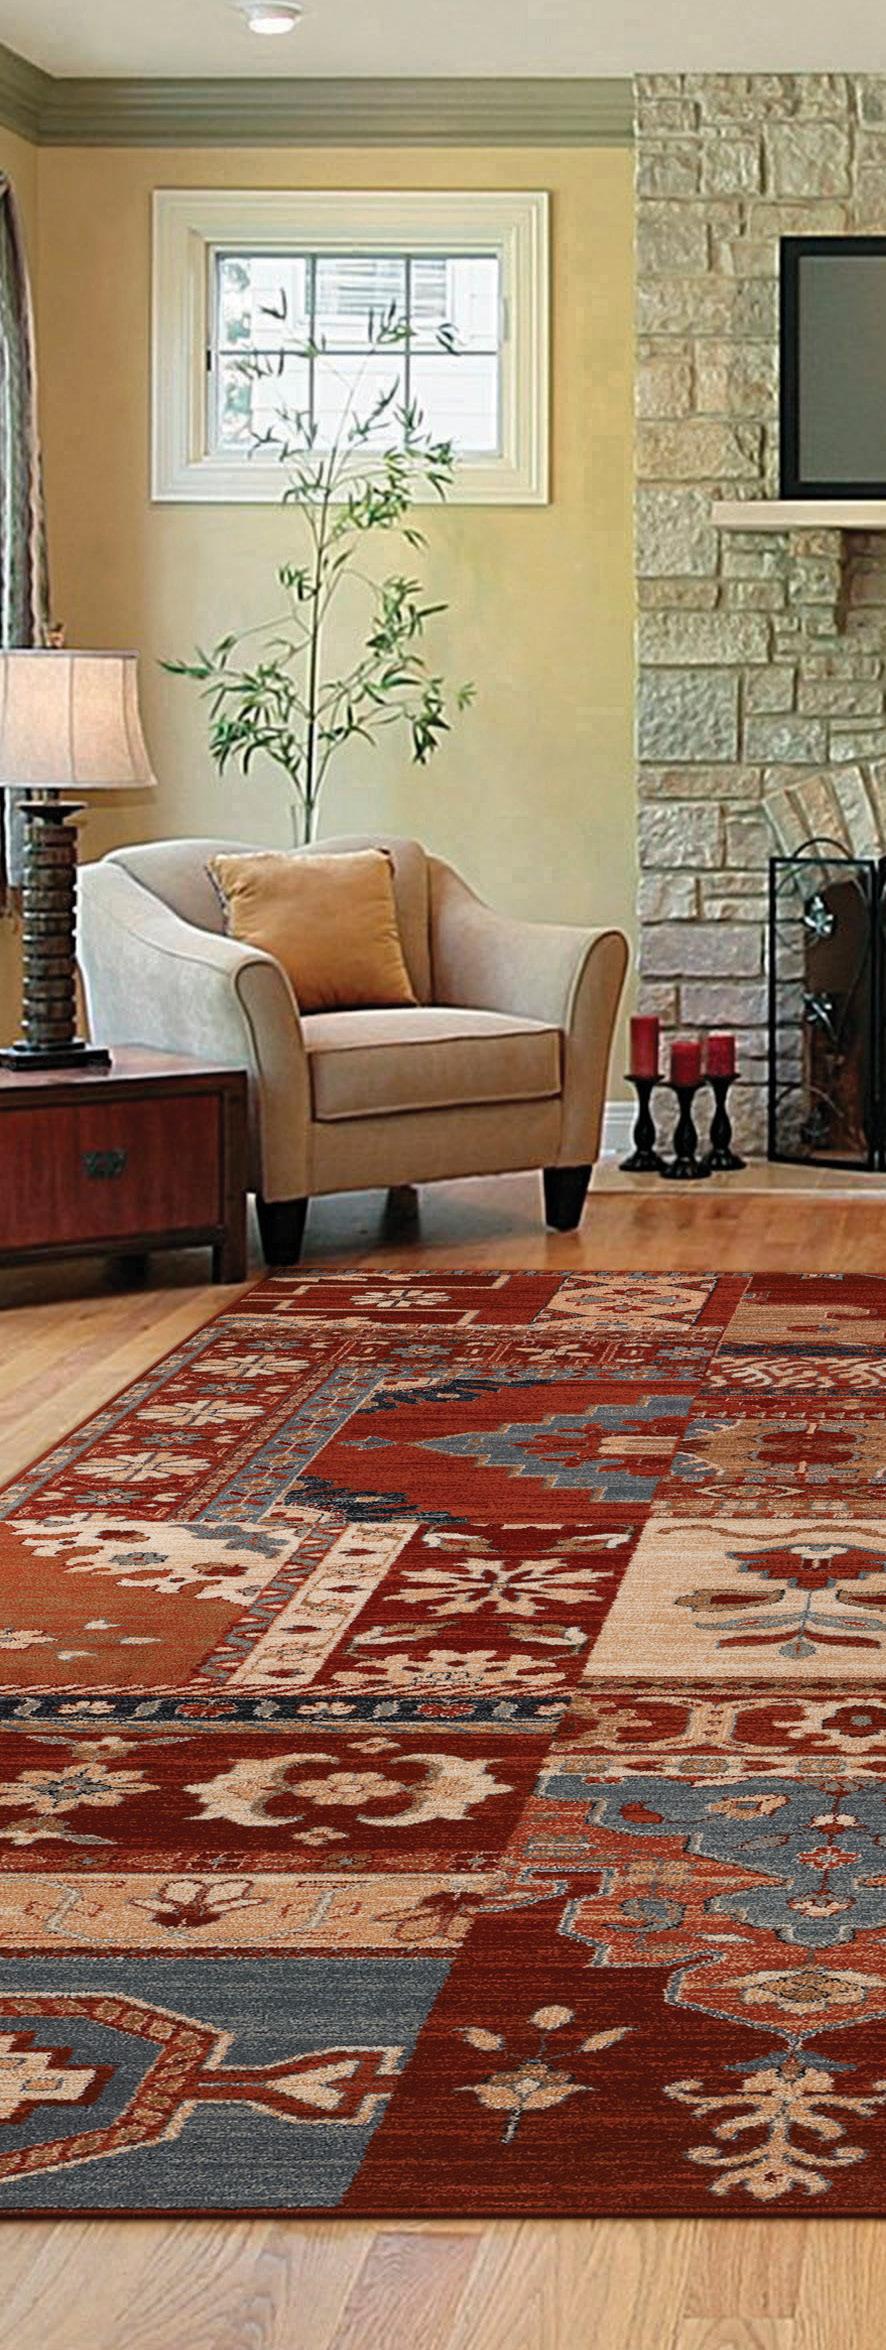 COURISTAN KASHIMAR, OLD WORLD CLASSICS, ROYAL KASHIMAR AND TIMELESS TREASURES AREA RUG COLLECTIONS WARRANTY CERTIFICATE 25 -YEAR LIMITED WARRANTY Couristan is proud to extend a limited 25-year